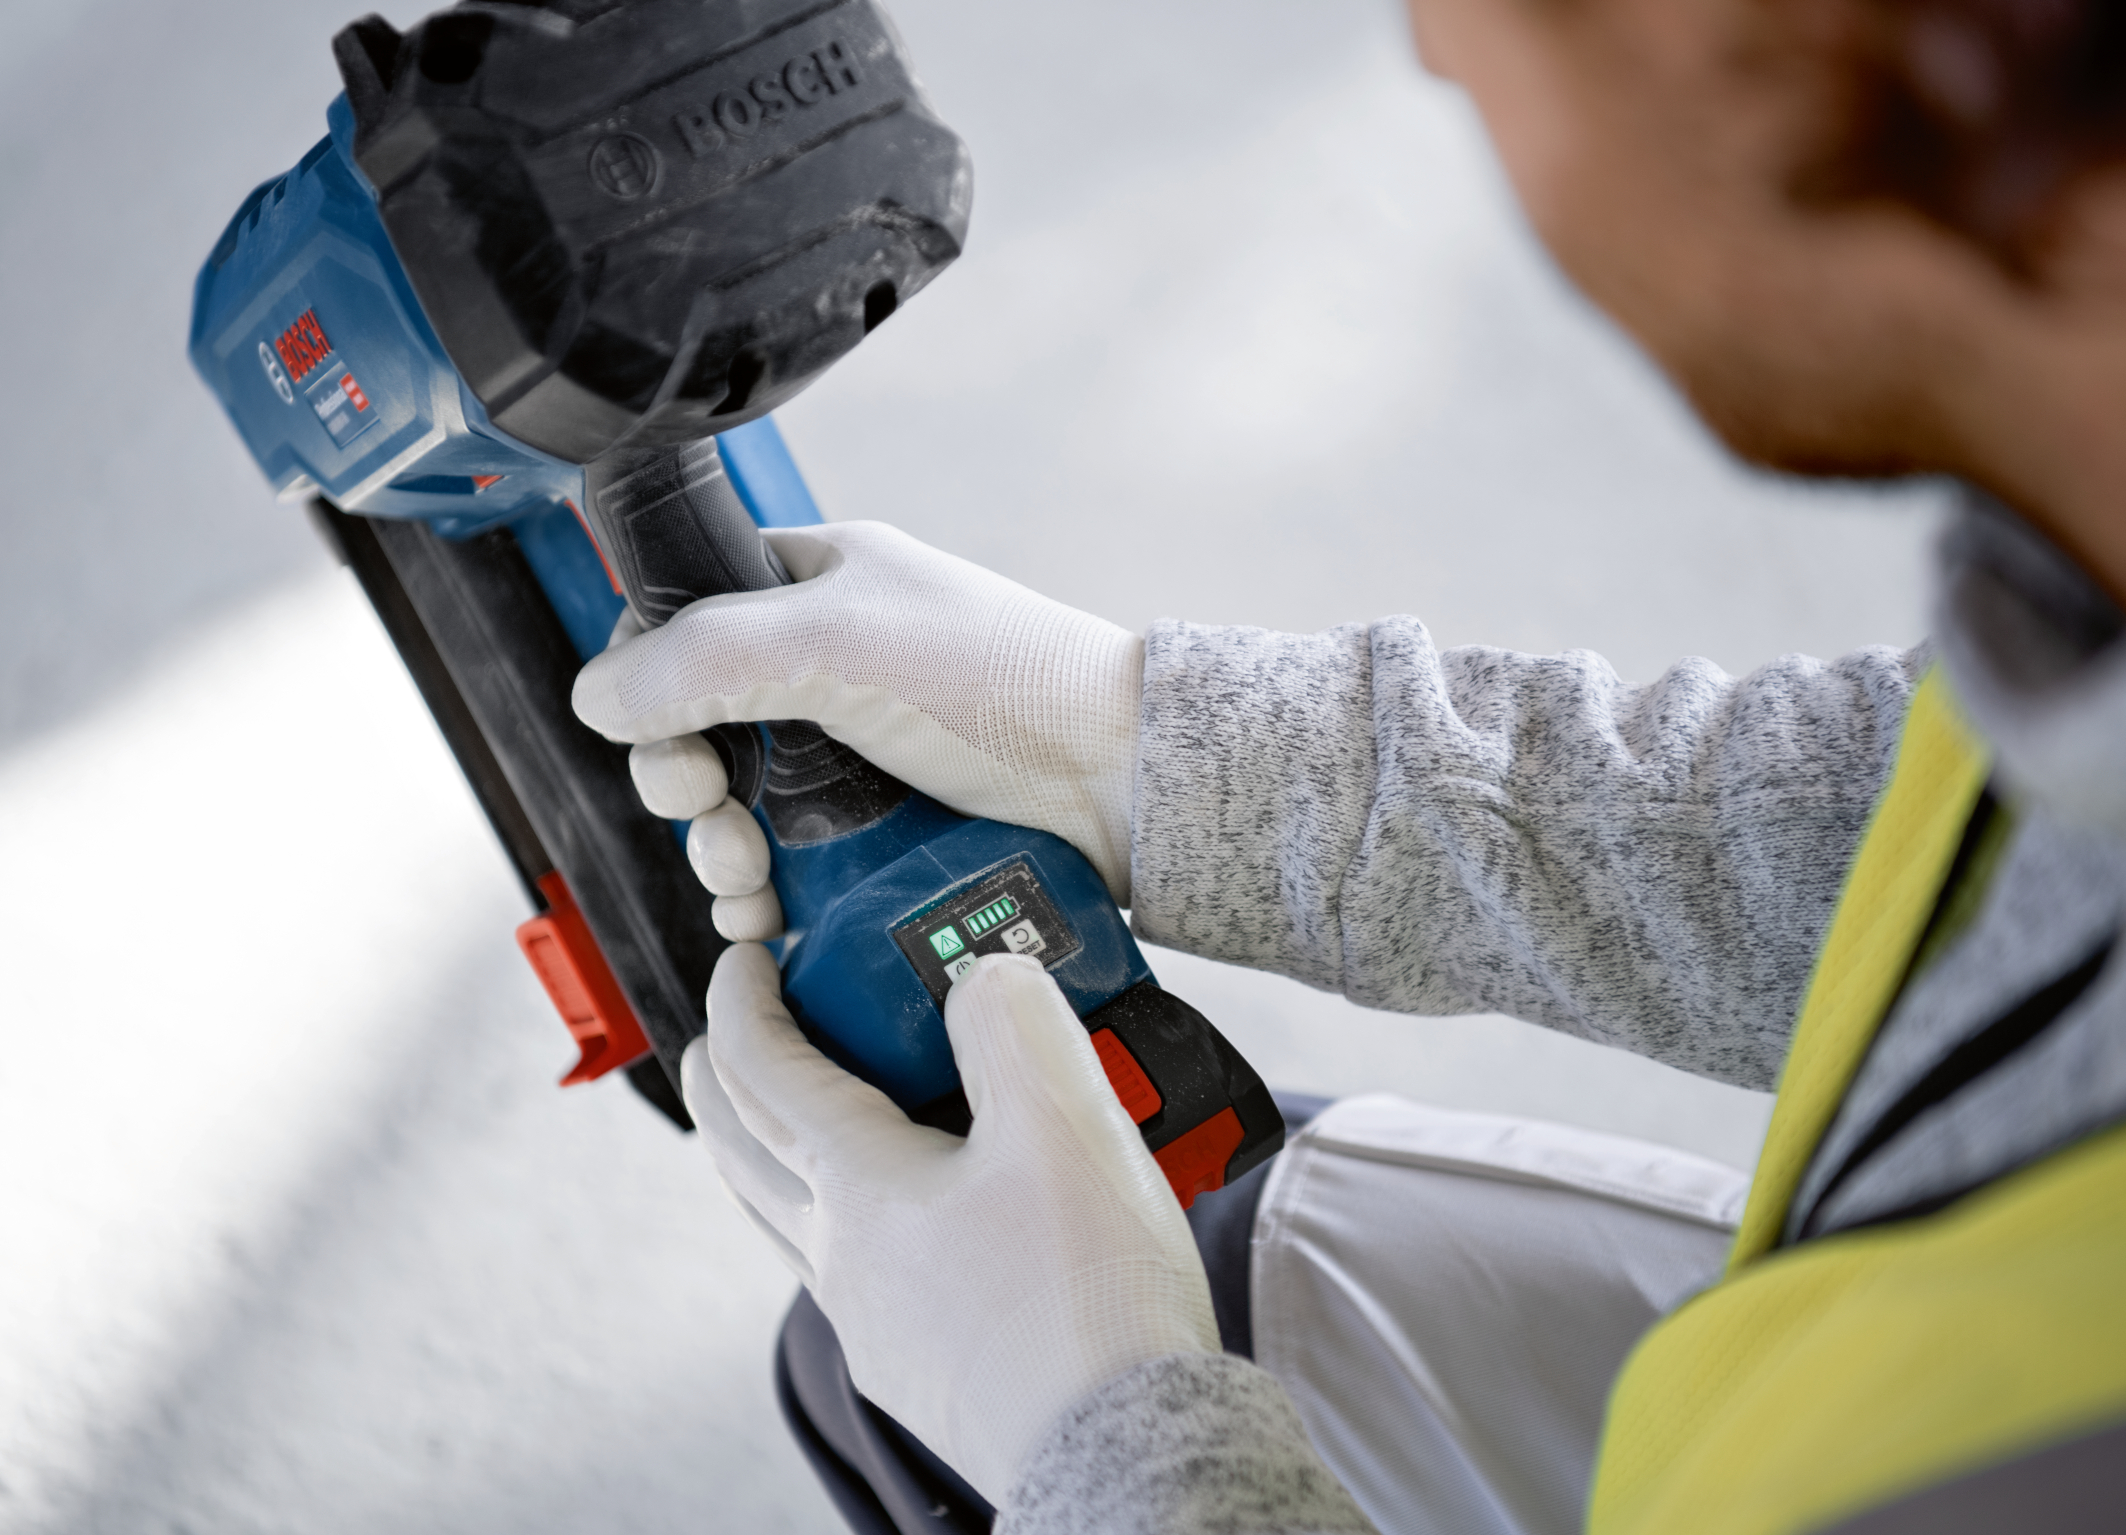 Bosch Enters 2023 Committed to their 18V Battery Platform, Announcing 32  New Cordless Tools Engineered to Tackle the Job